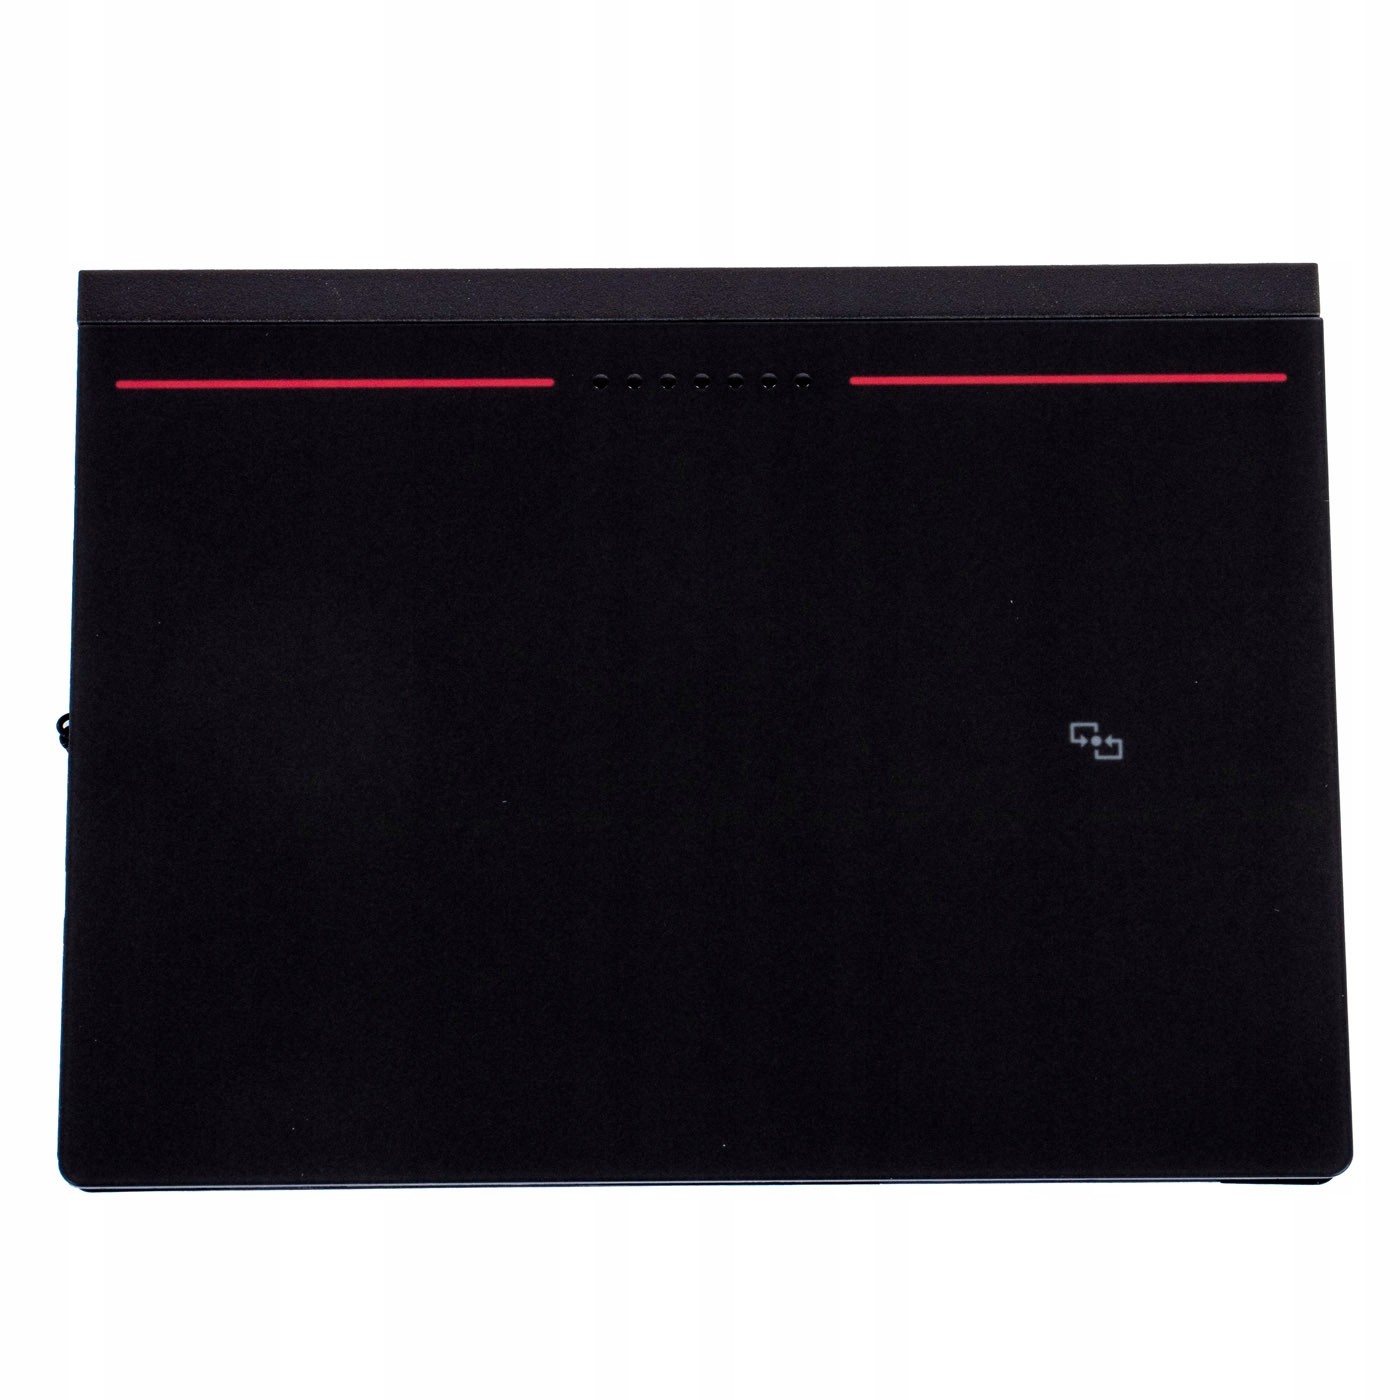 Touchpad Lenovo T440 T440s X1 Carbon 2 2014 Nfc